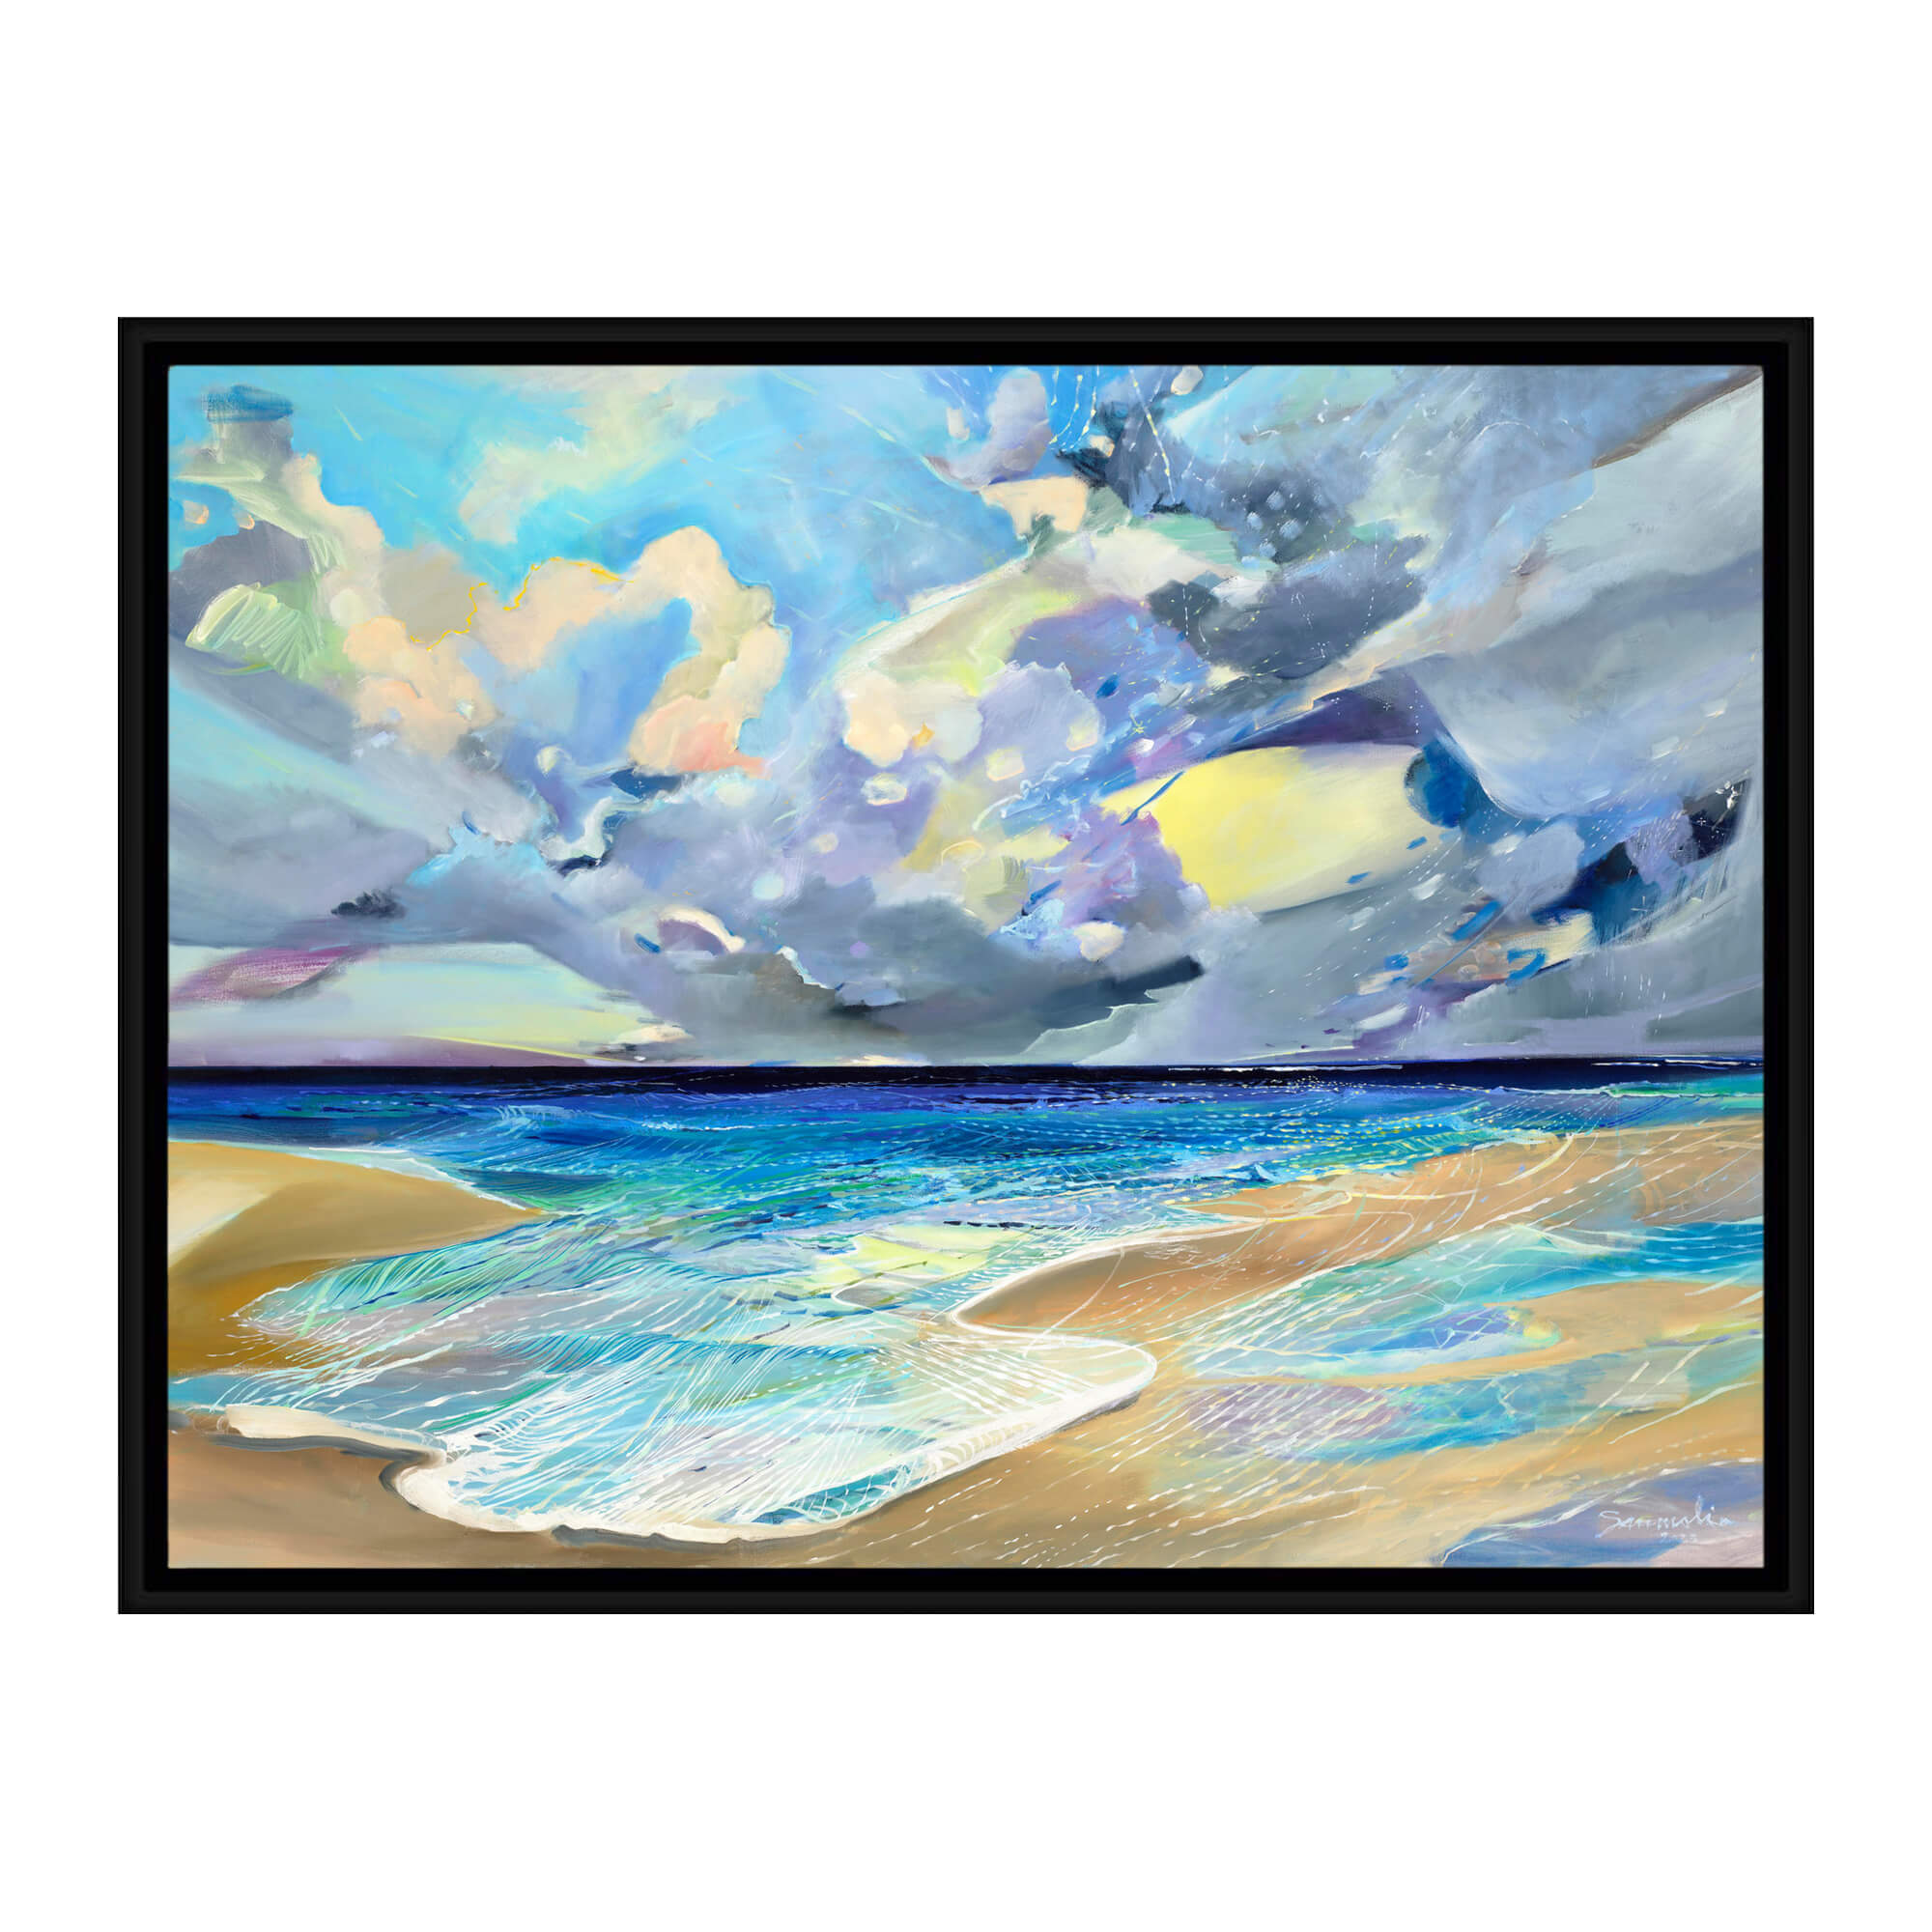 Abstract seascape with purple sky and clear ocean water by Hawaii artist Saumolia Puagpuaga